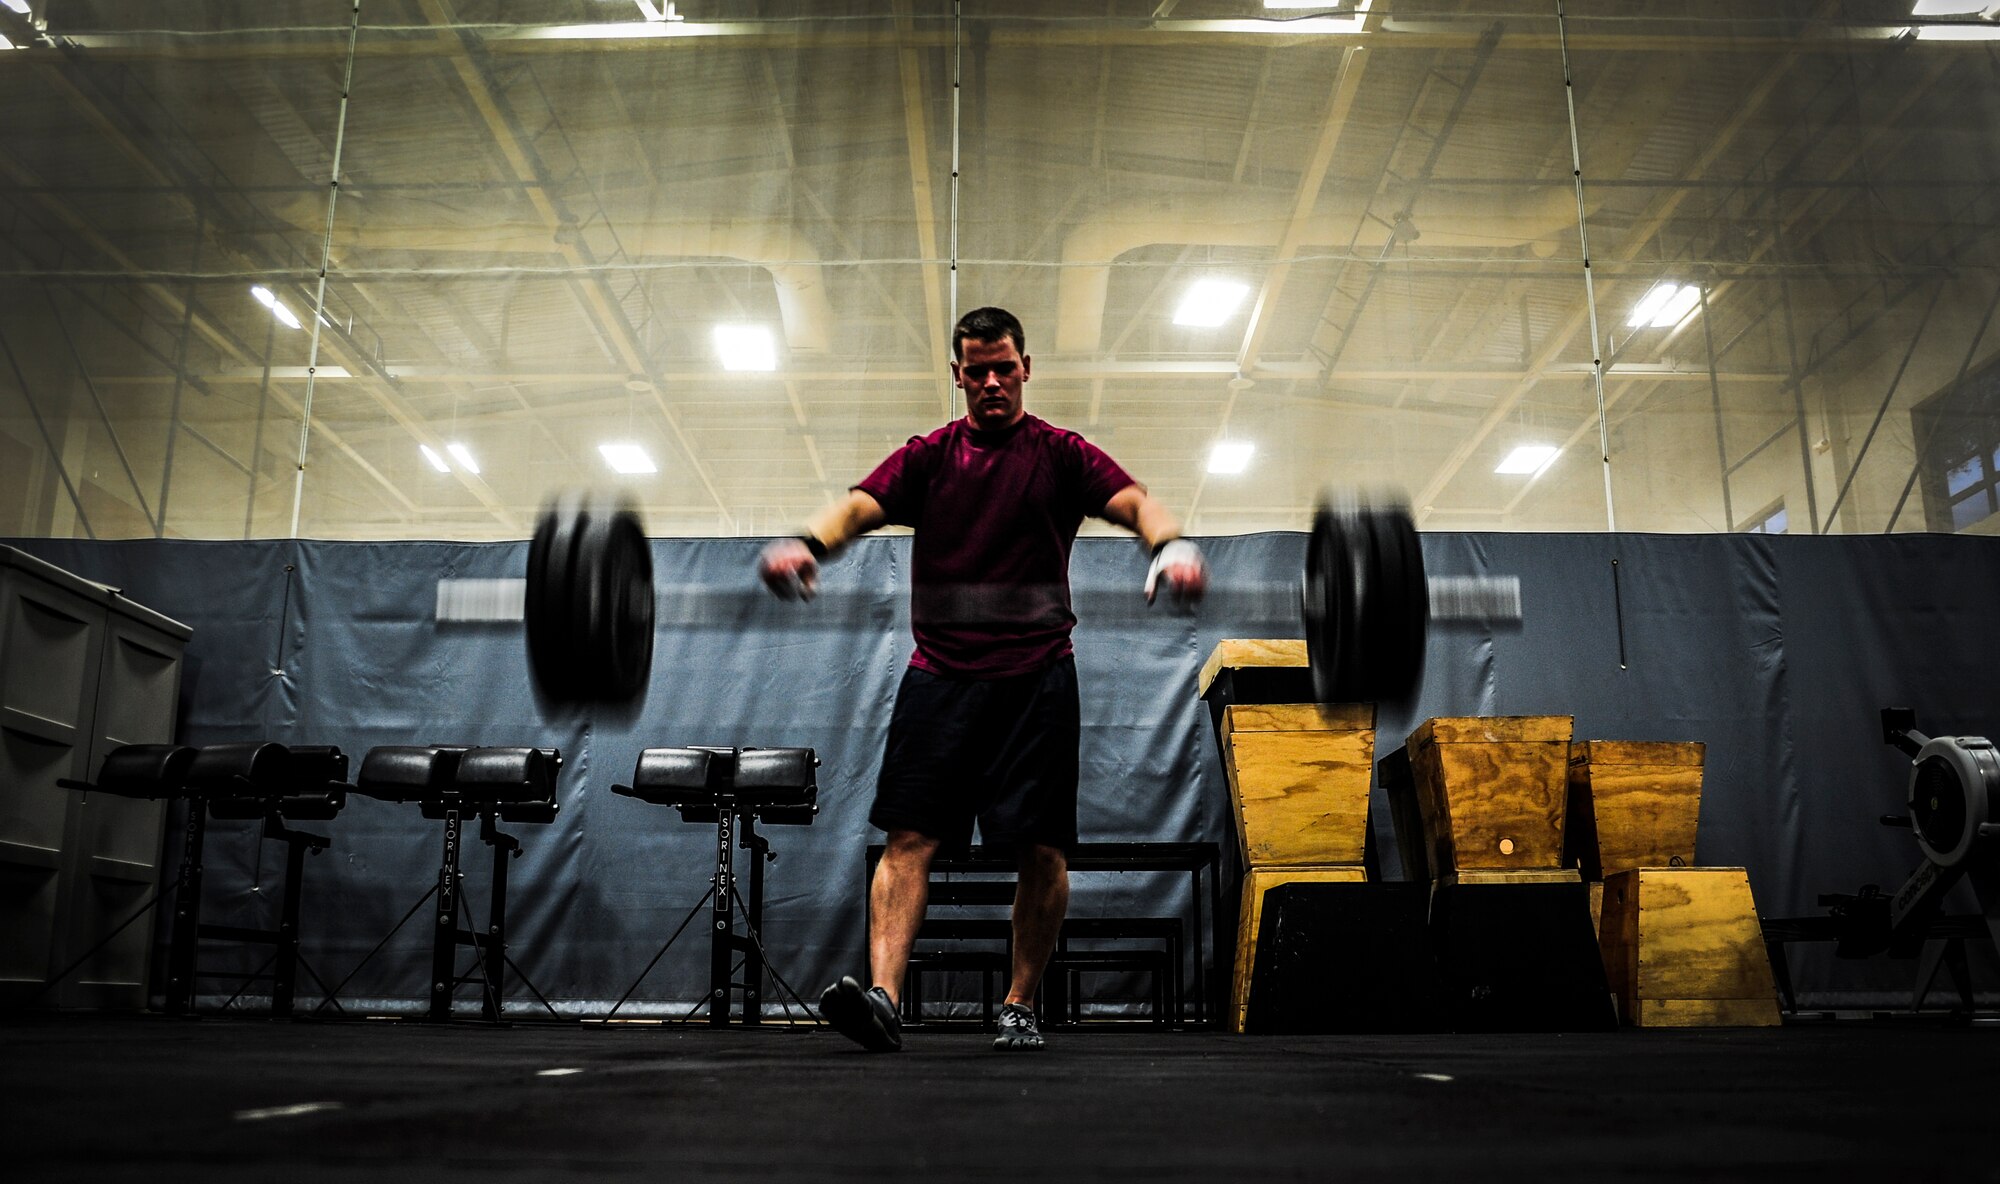 Airman 1st Class Andy Sims, 437th Maintenance Squadron crew chief, releases the bar and weights after performing a power clean during a CrossFit class Nov. 19, 2012, at the Joint Base Charleston – Air Base Fitness Center. The CrossFit classes can accommodate individuals with different strength abilities and experience and there is always someone on hand to assist with proper form and technique. (U.S. Air Force photo/ Senior Airman Dennis Sloan)